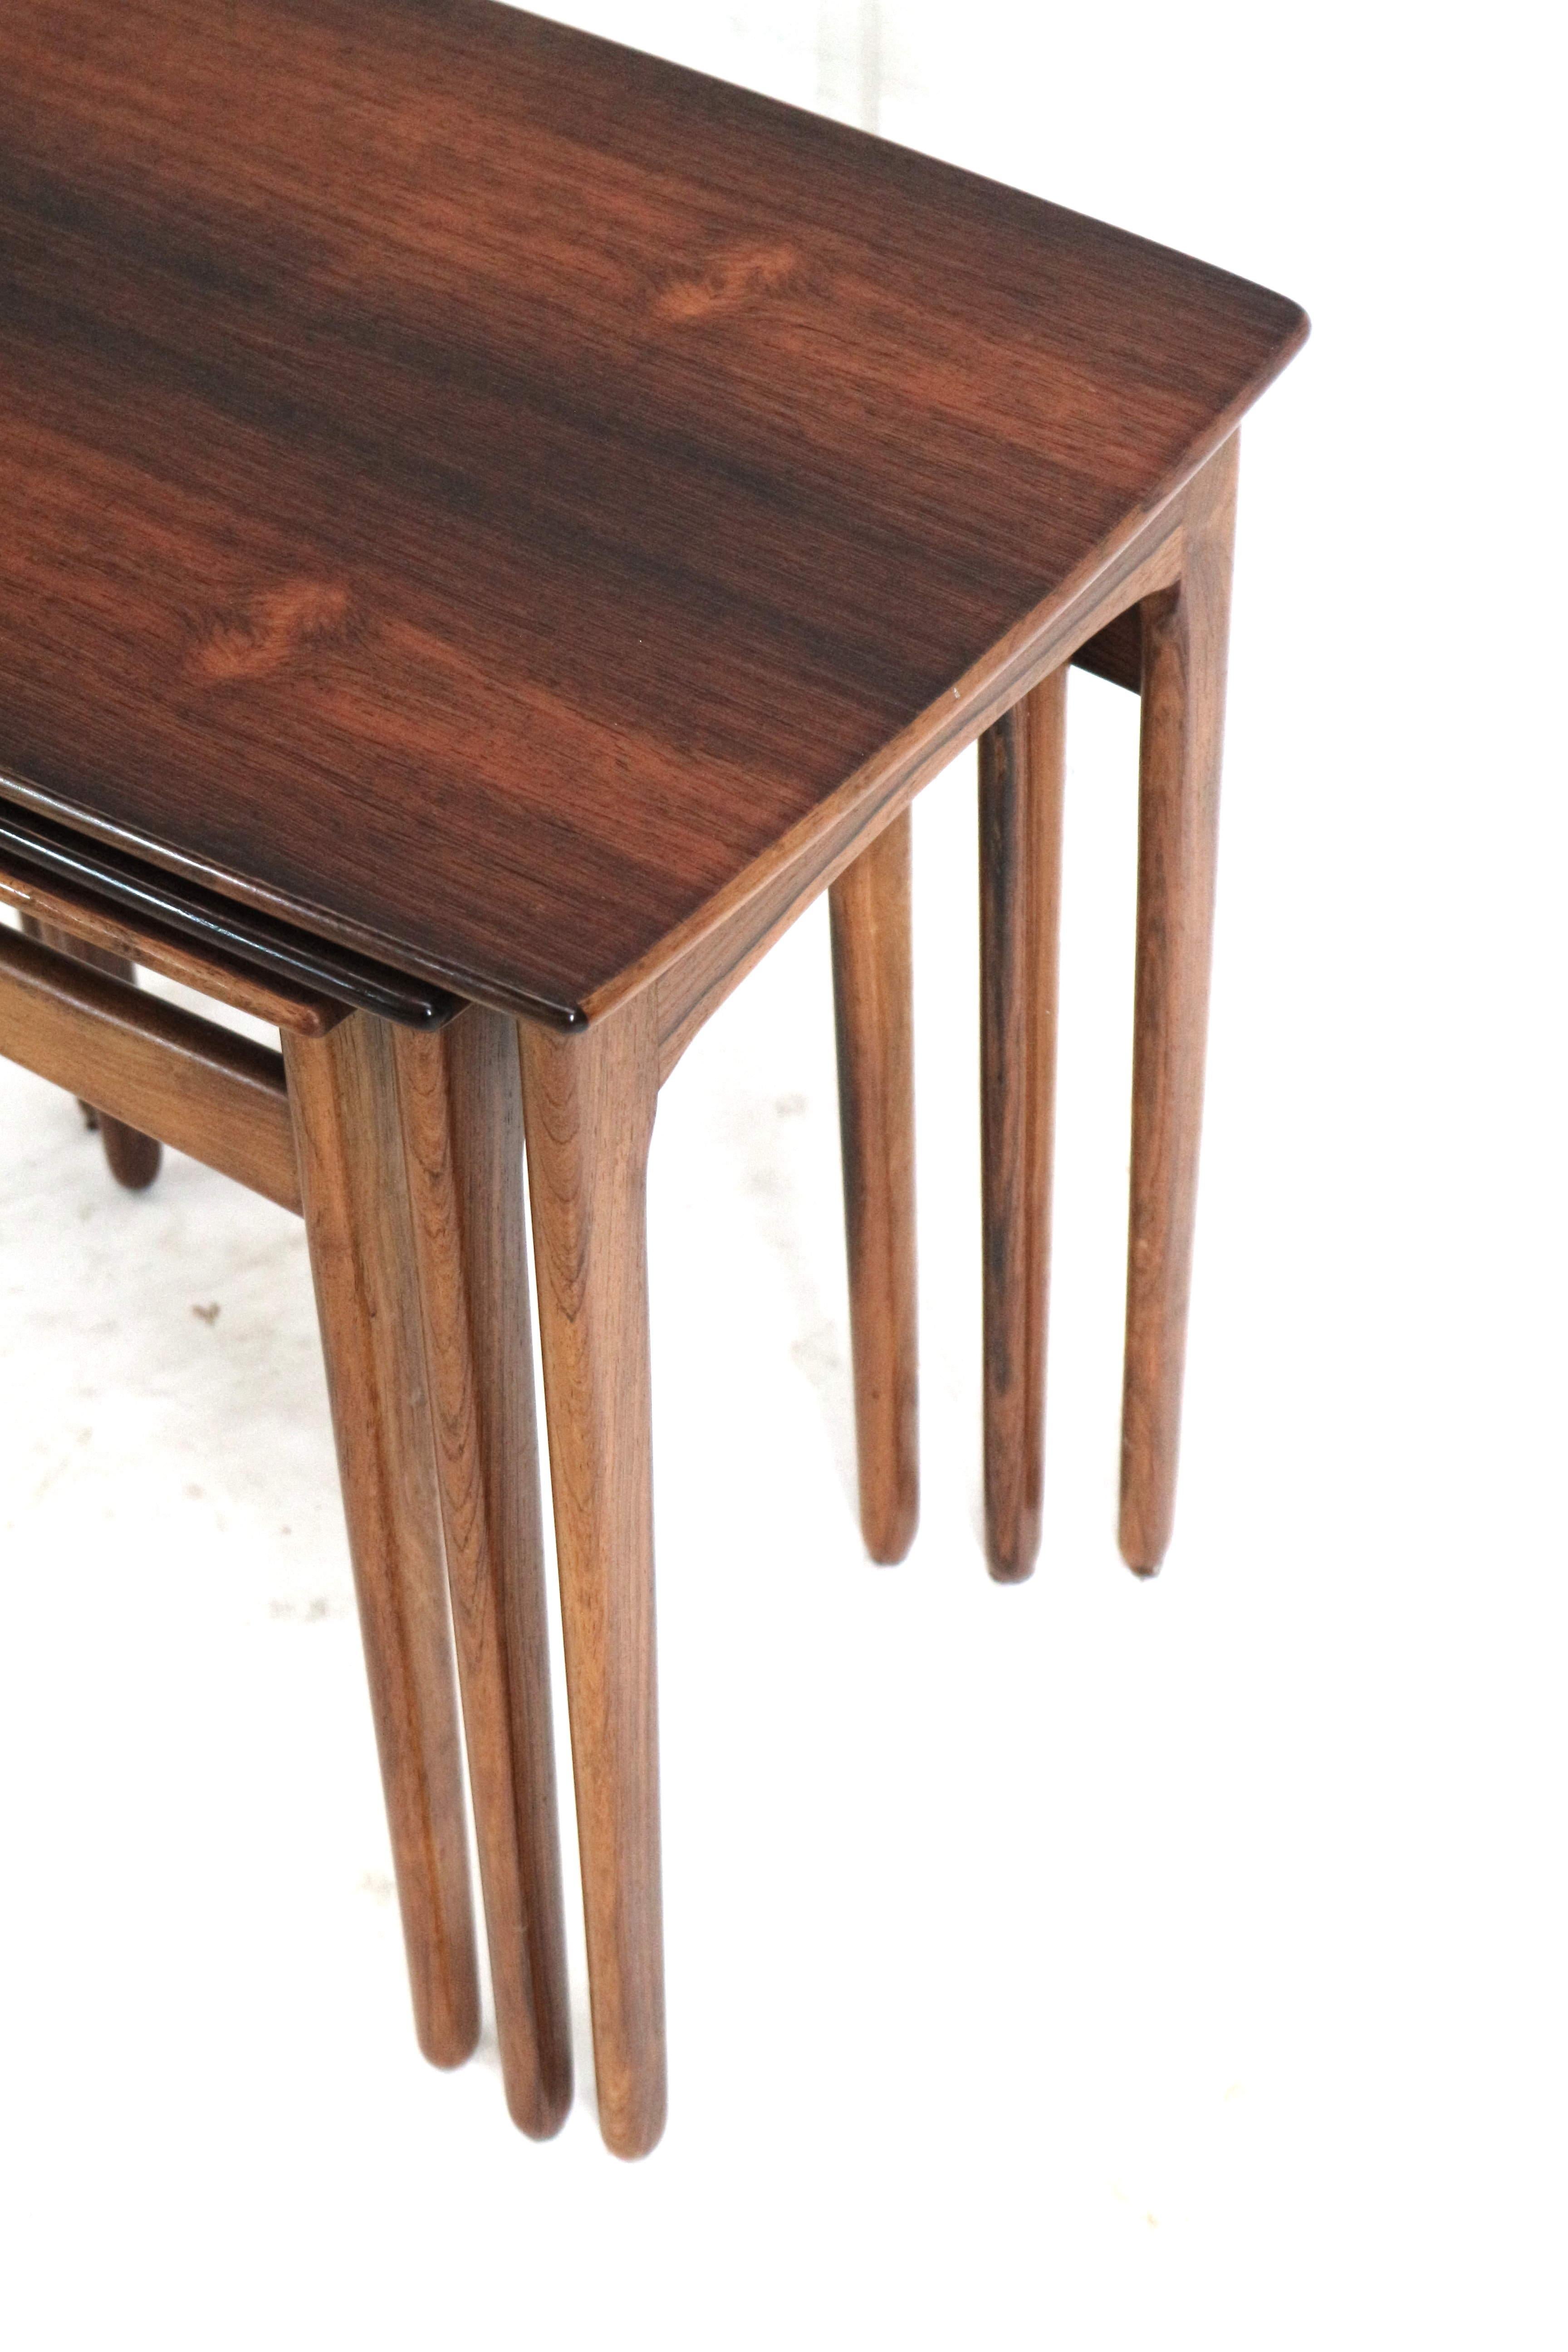 Rosewood Danish vintage rosewood nesting tables / set of 3 side tables made in the 60s For Sale